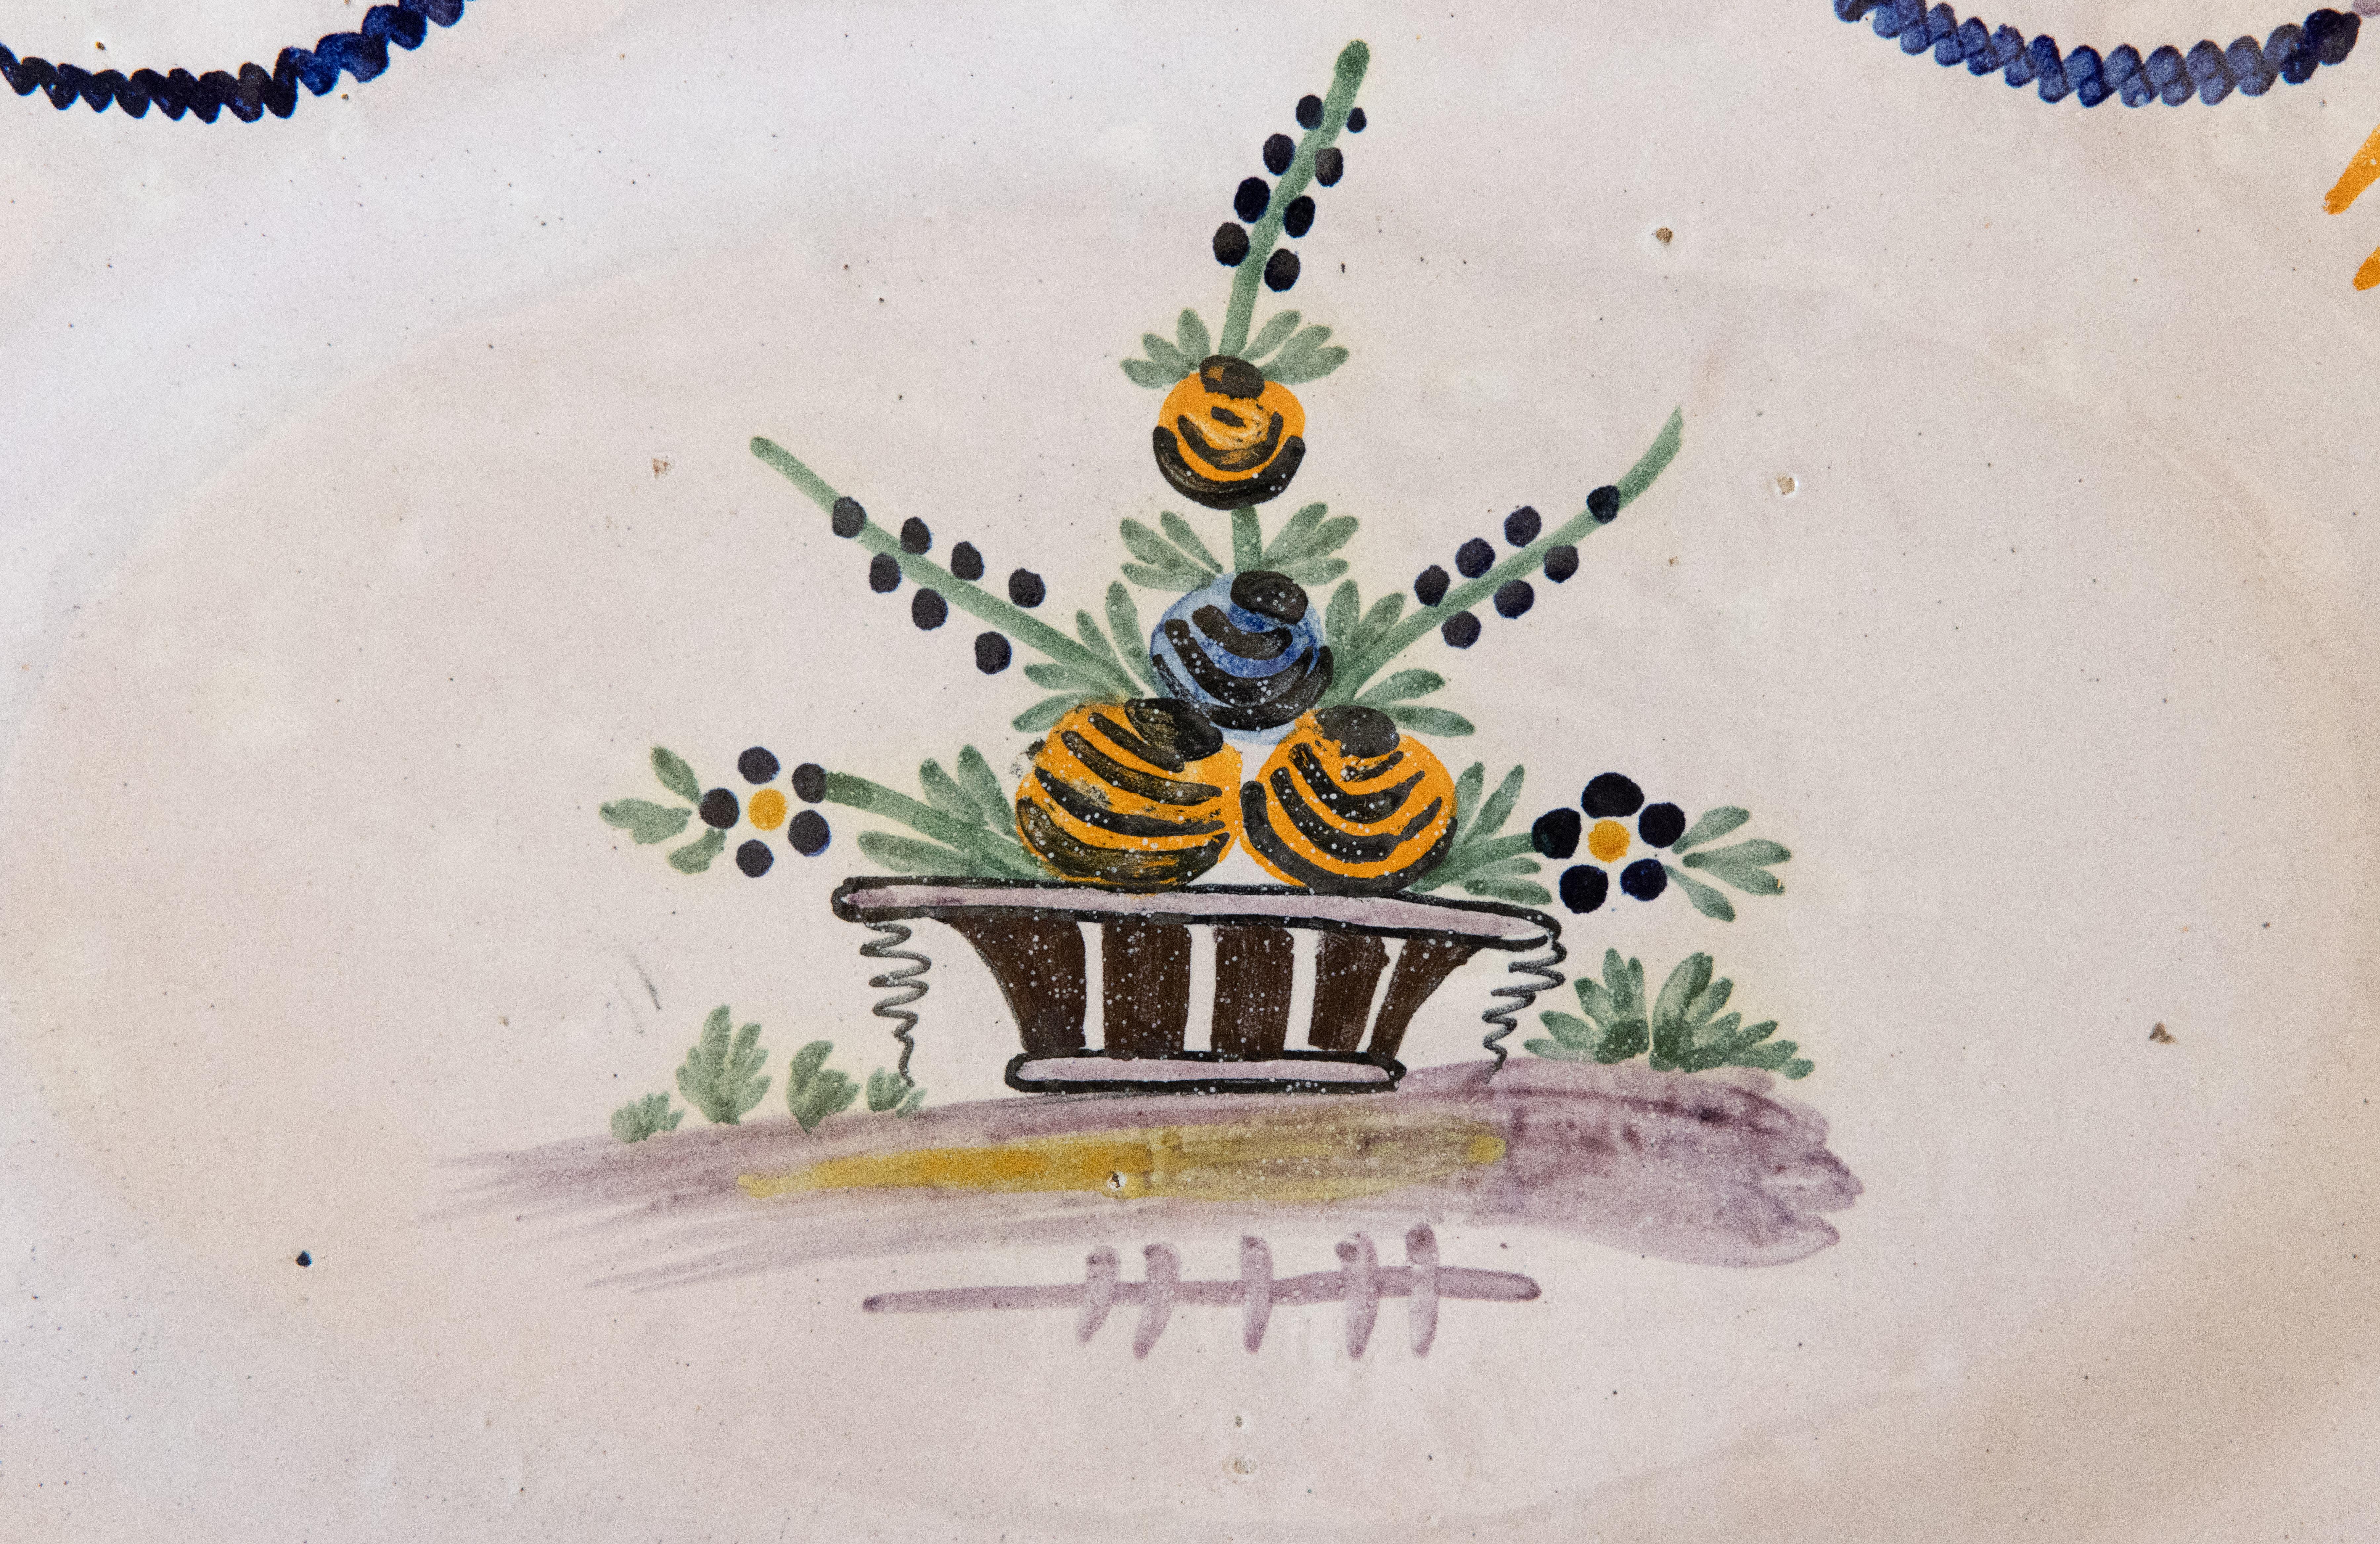 A gorgeous antique 19th-Century French Moustiers hand painted oval faience floral wall platter. This rare decorative platter has remarkable details with a hand painted flower pot center surrounded by a festive garland border and a lovely scalloped